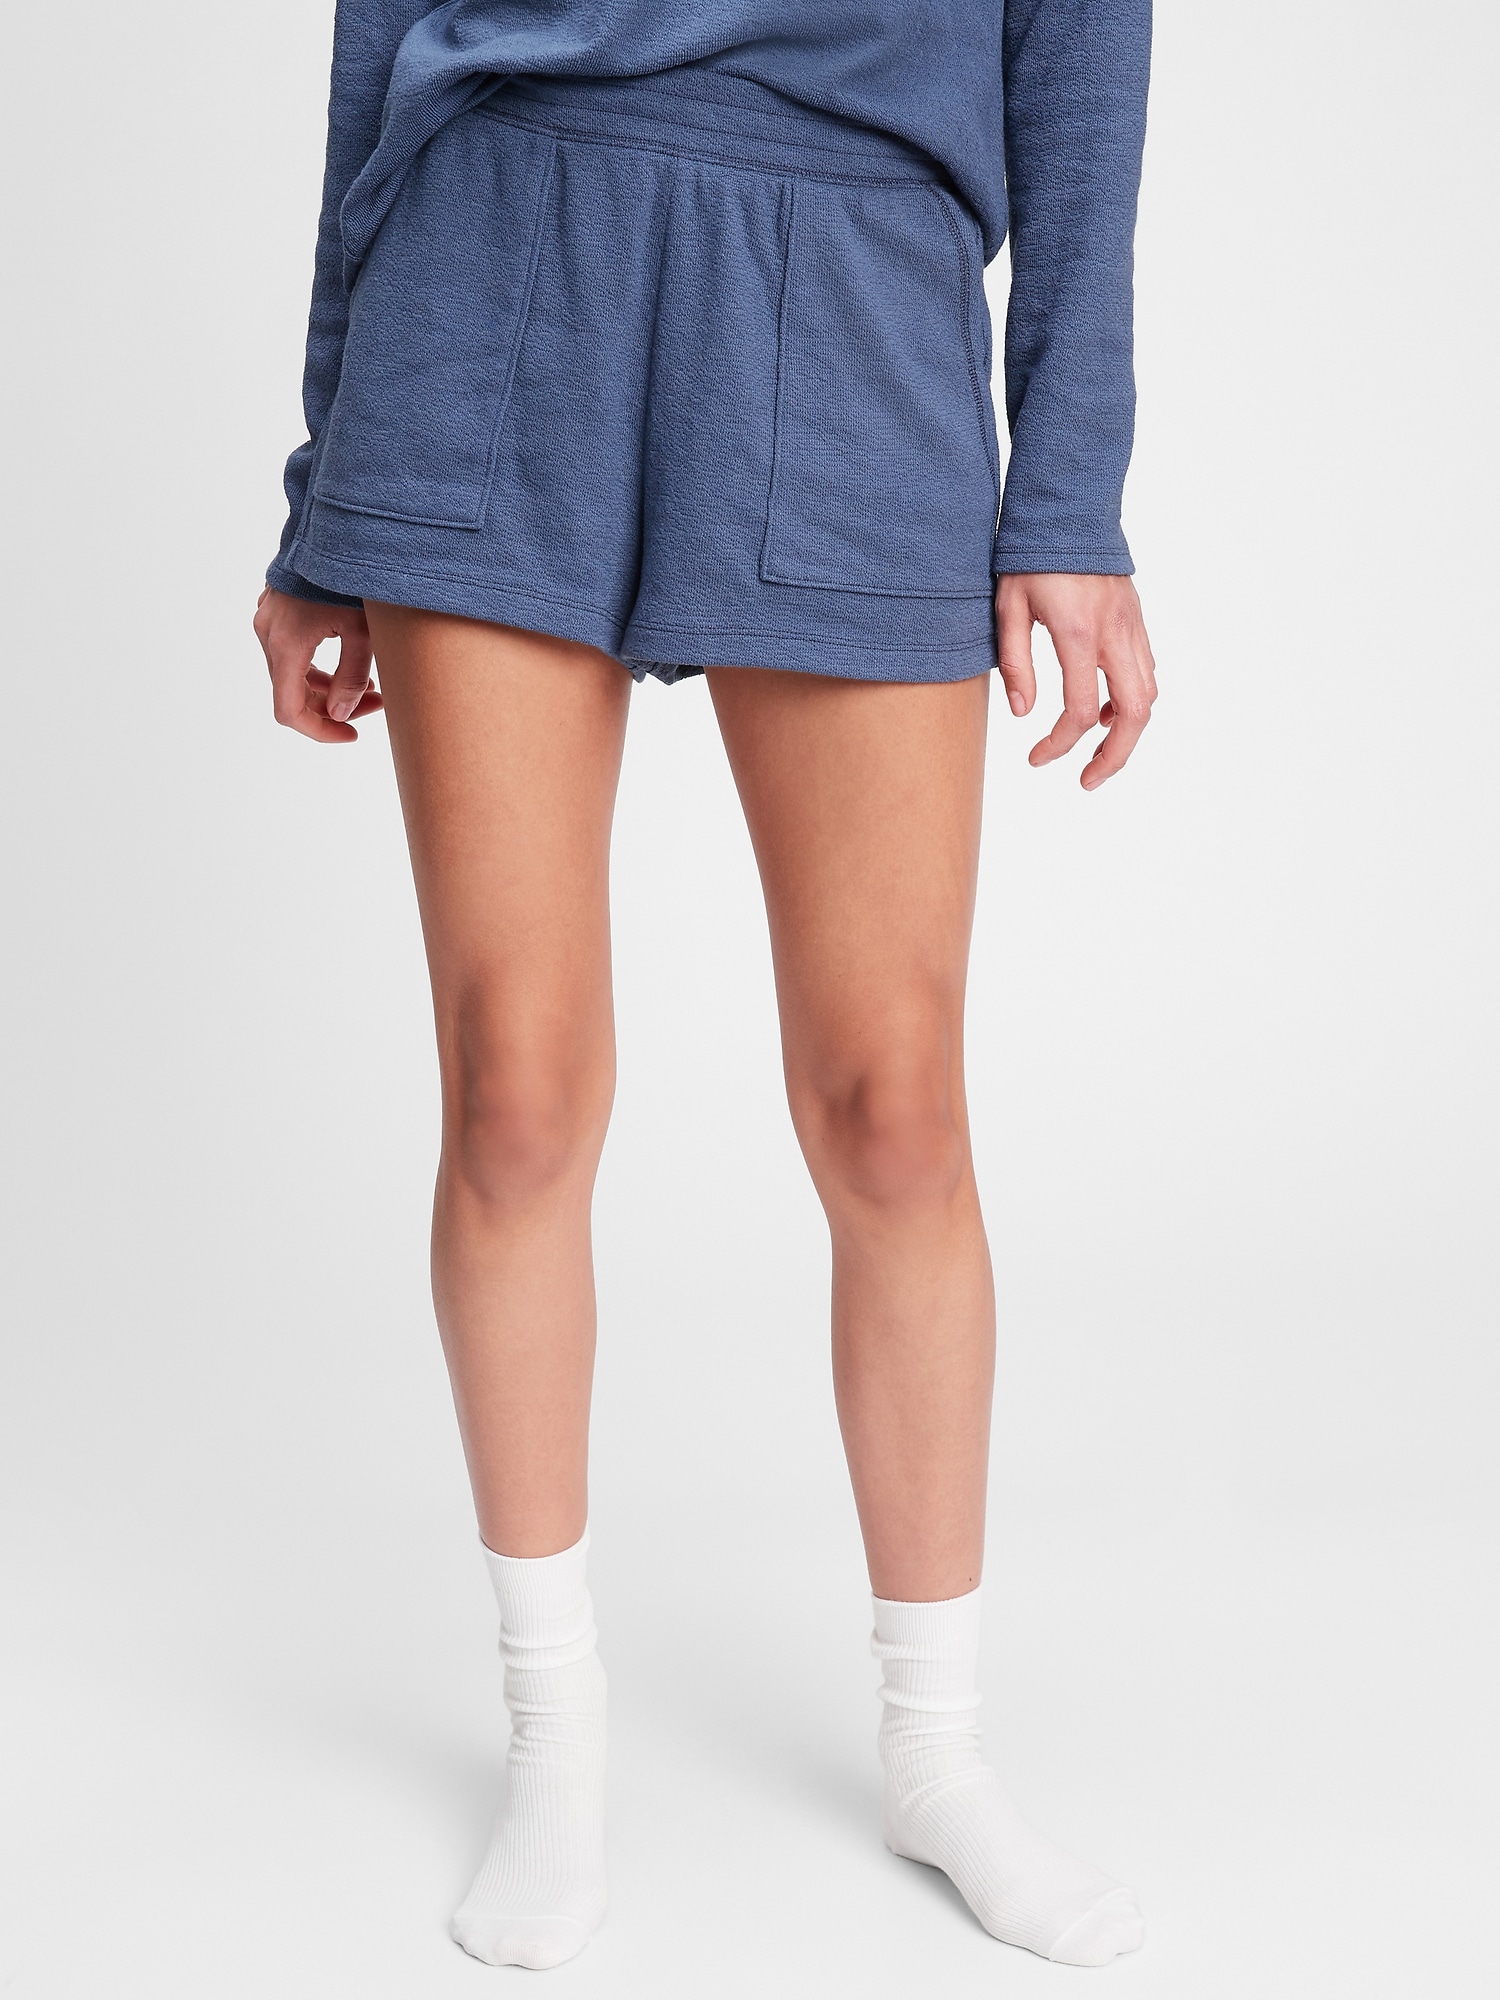 Easy Textured Shorts | Gap Factory